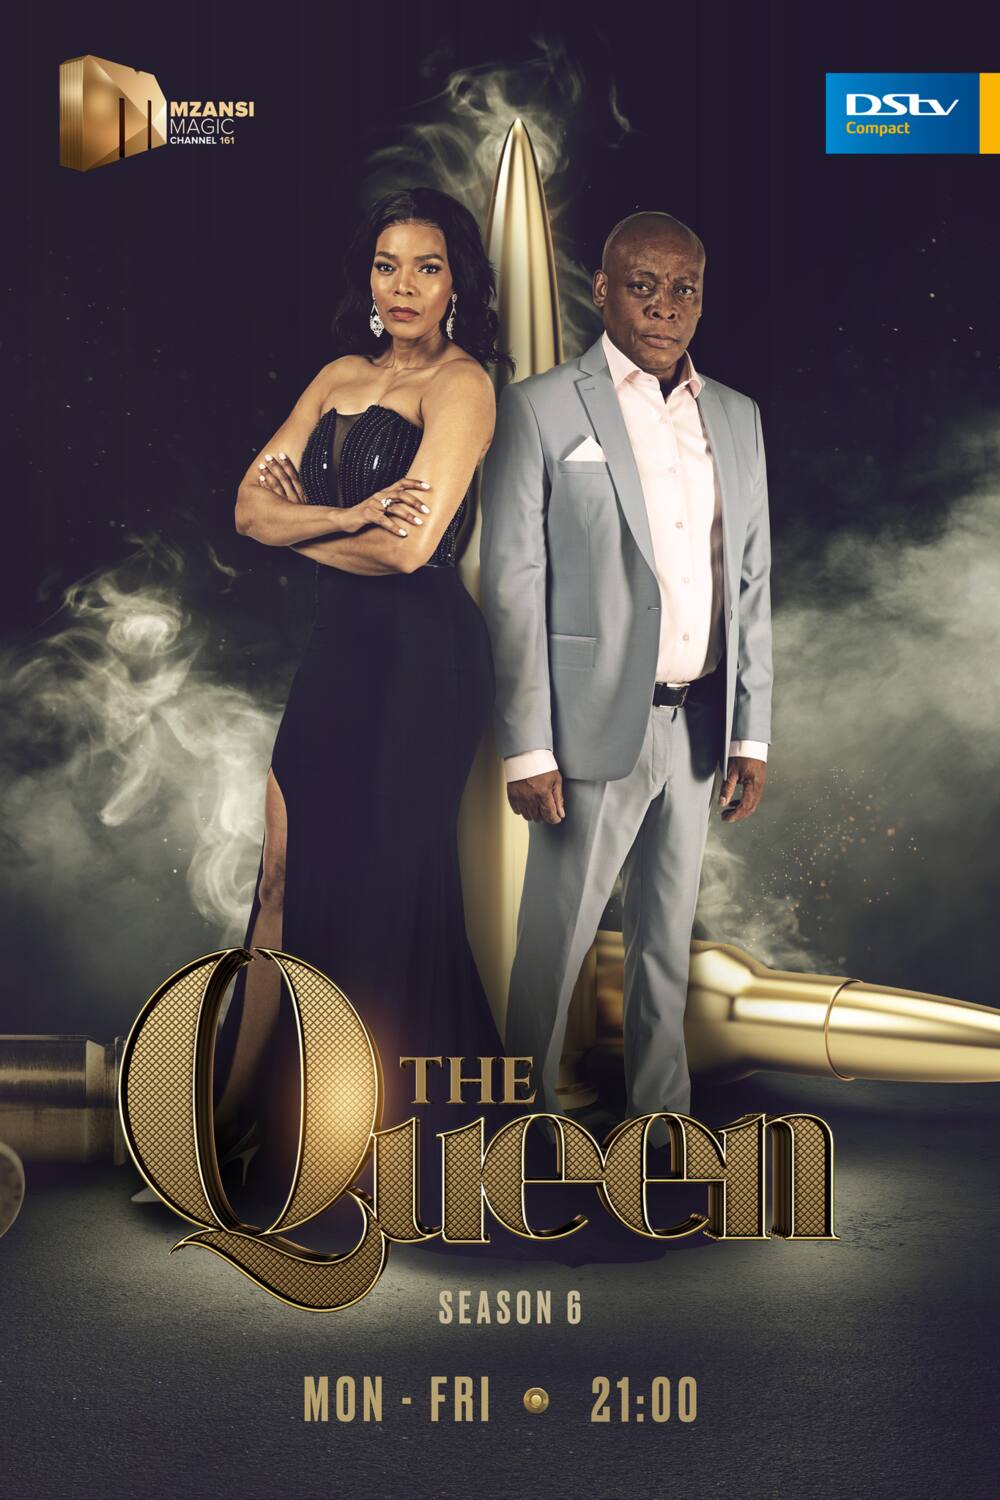 May episodes of The Queen on Mzansi Magic